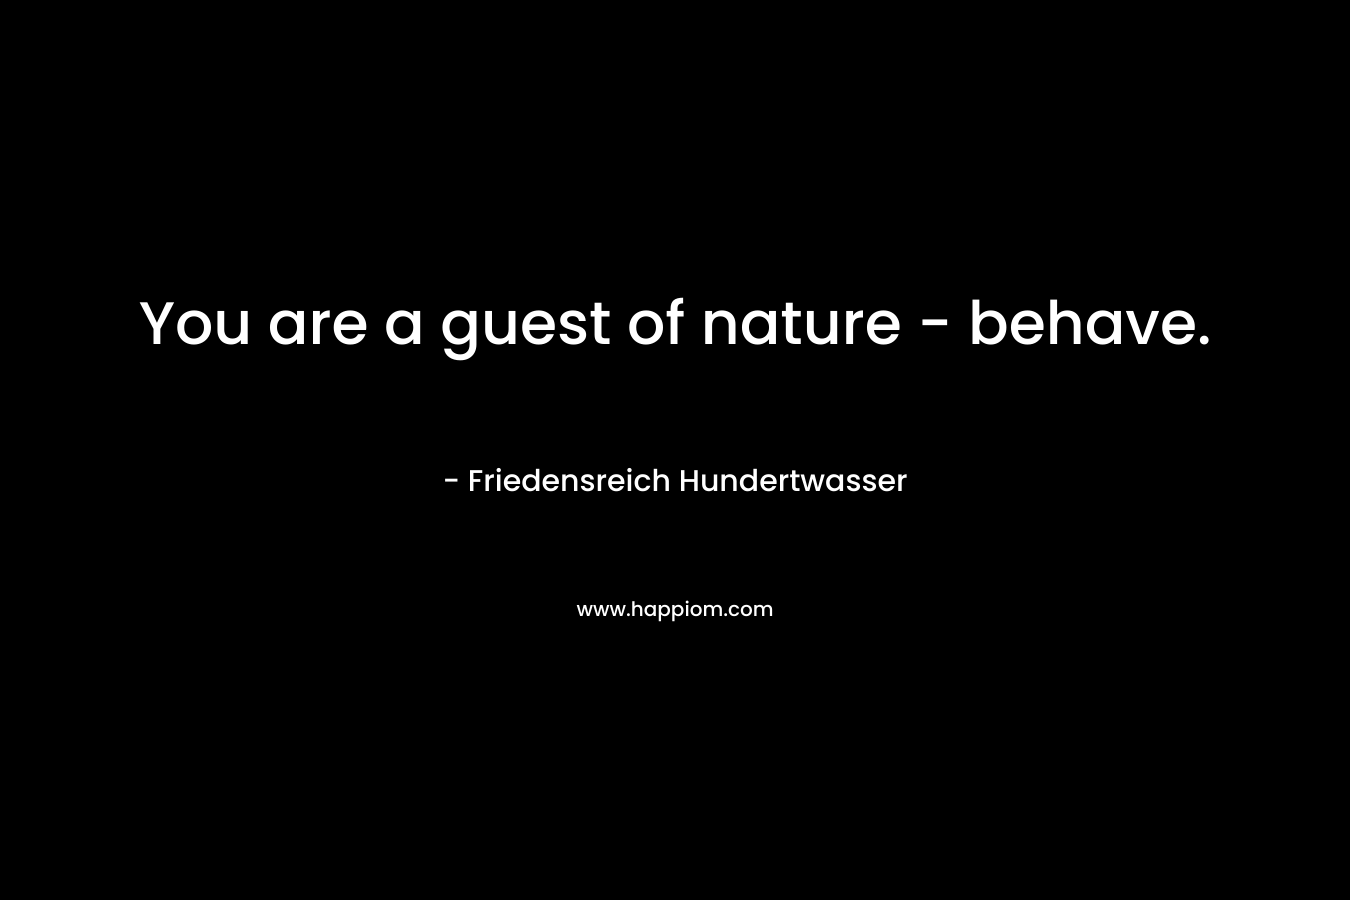 You are a guest of nature - behave.